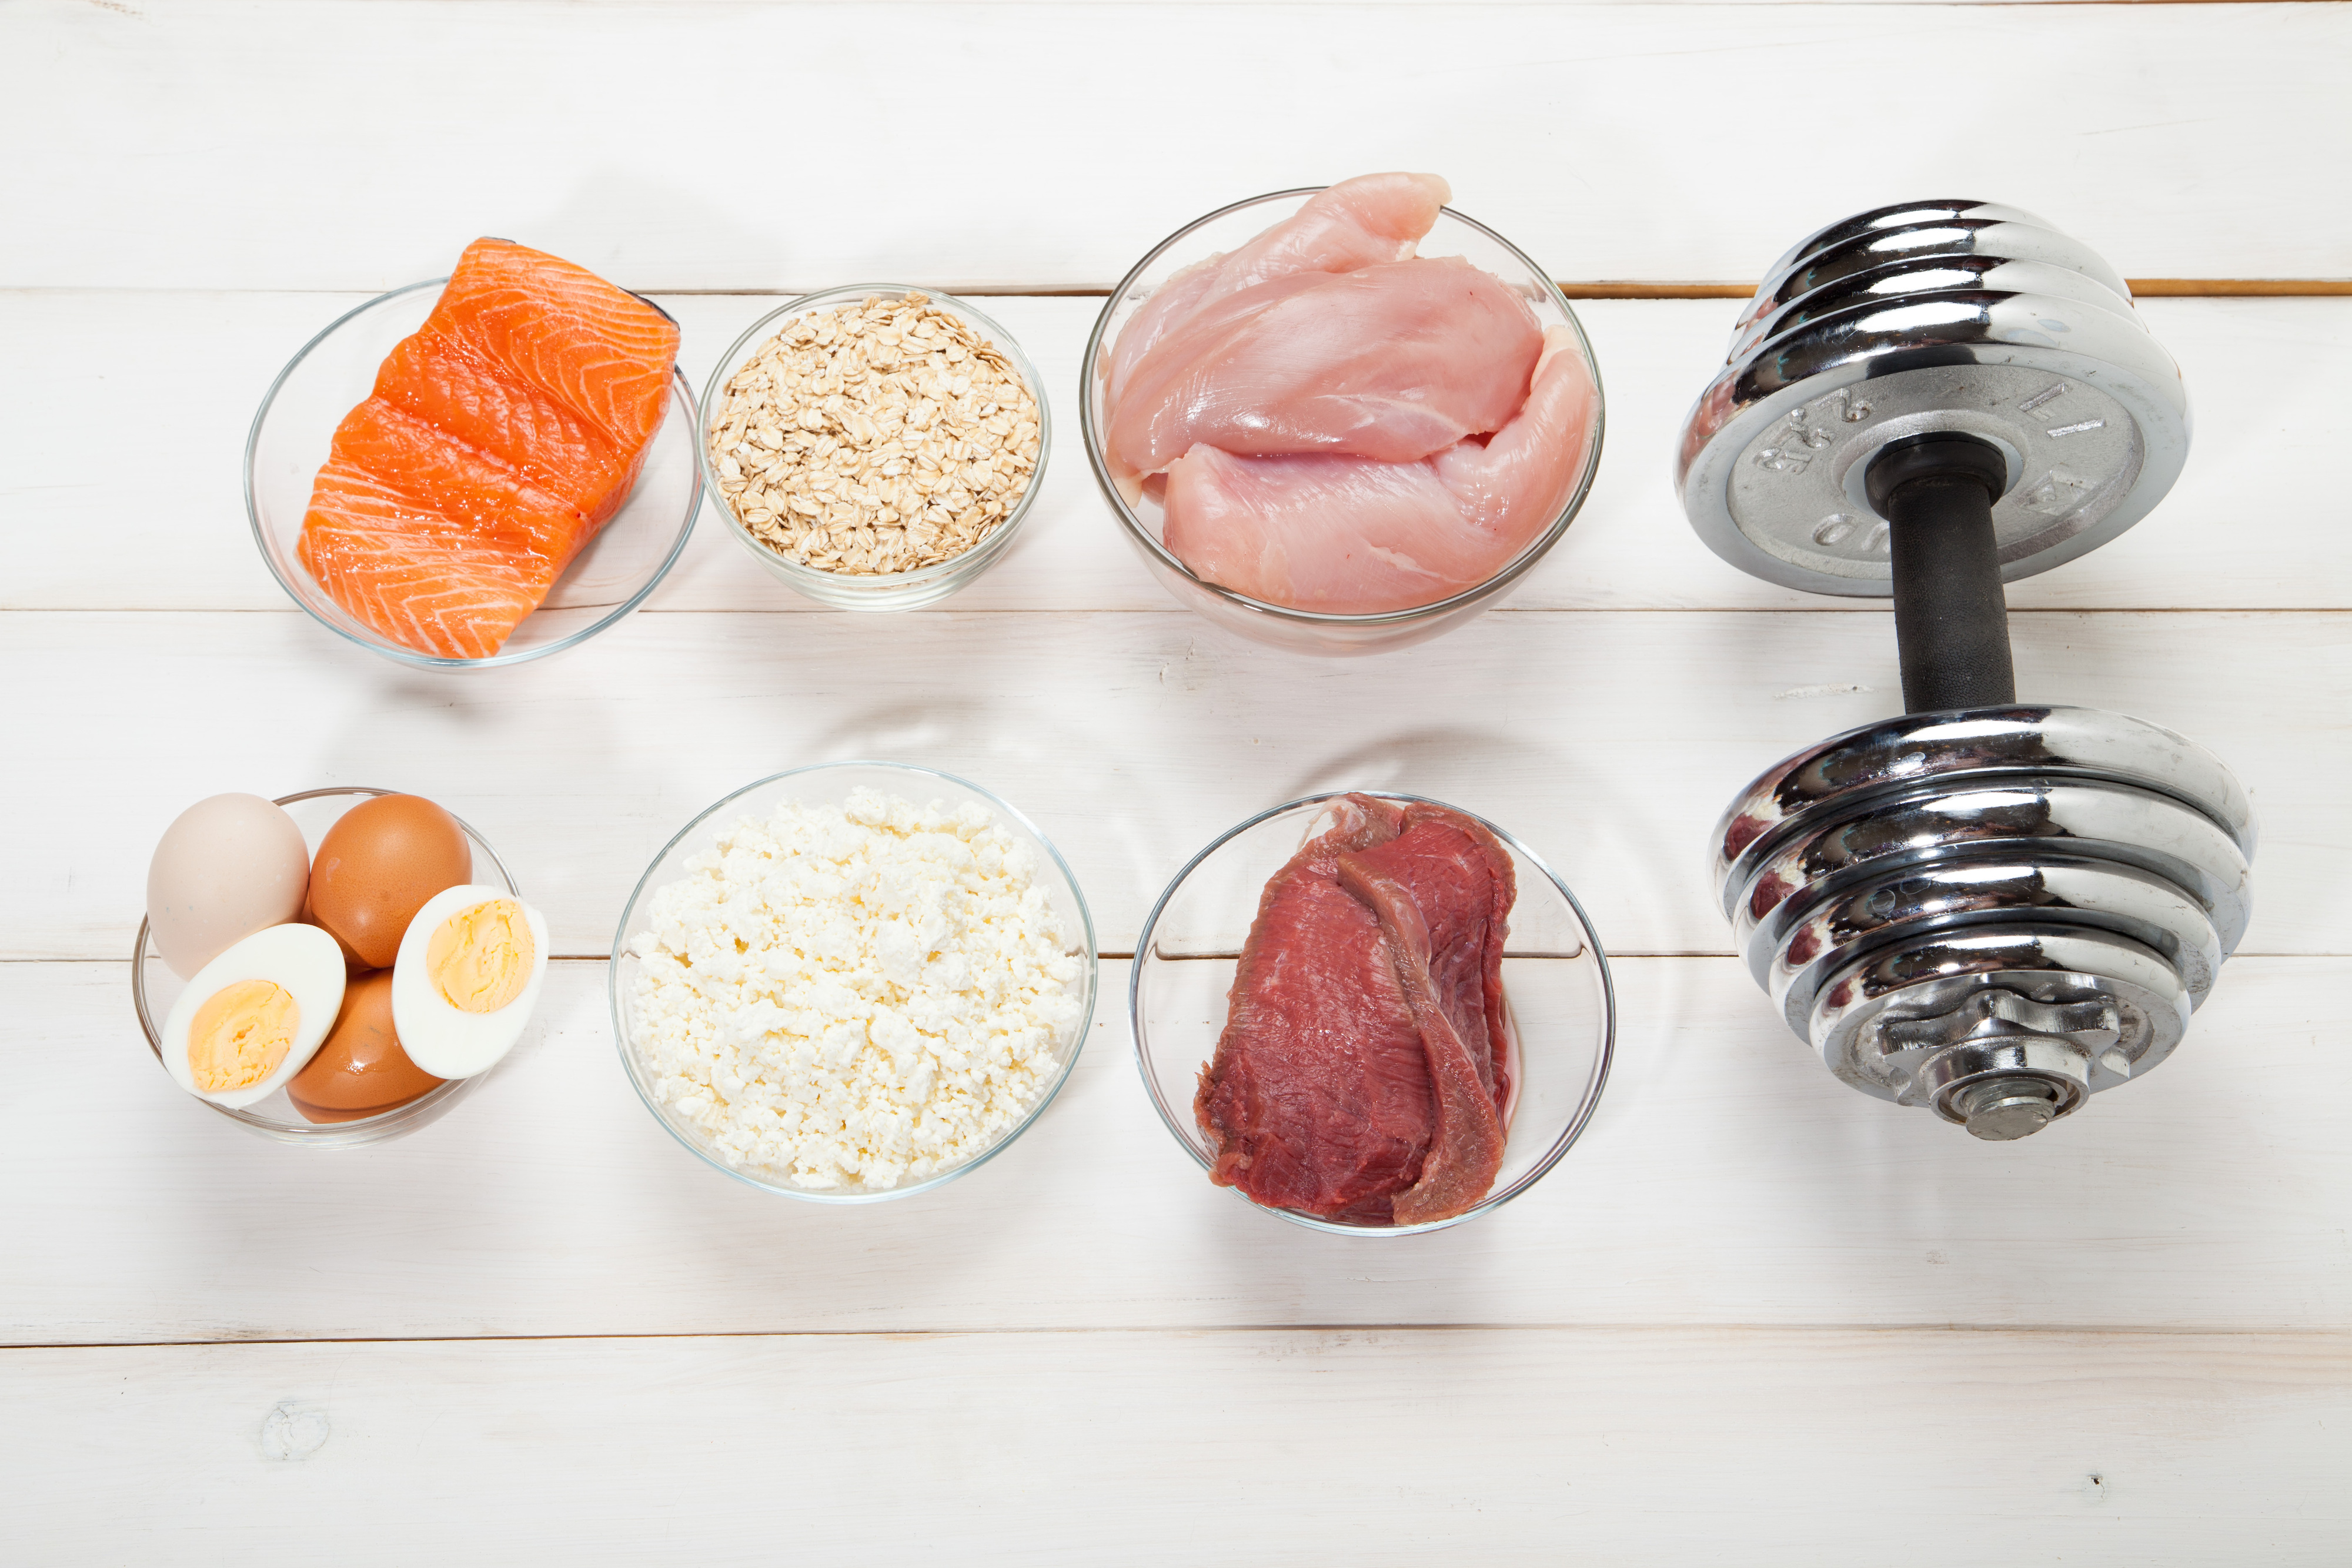 Want to know how to build muscle? A doctor says you should eat these foods  - The Manual